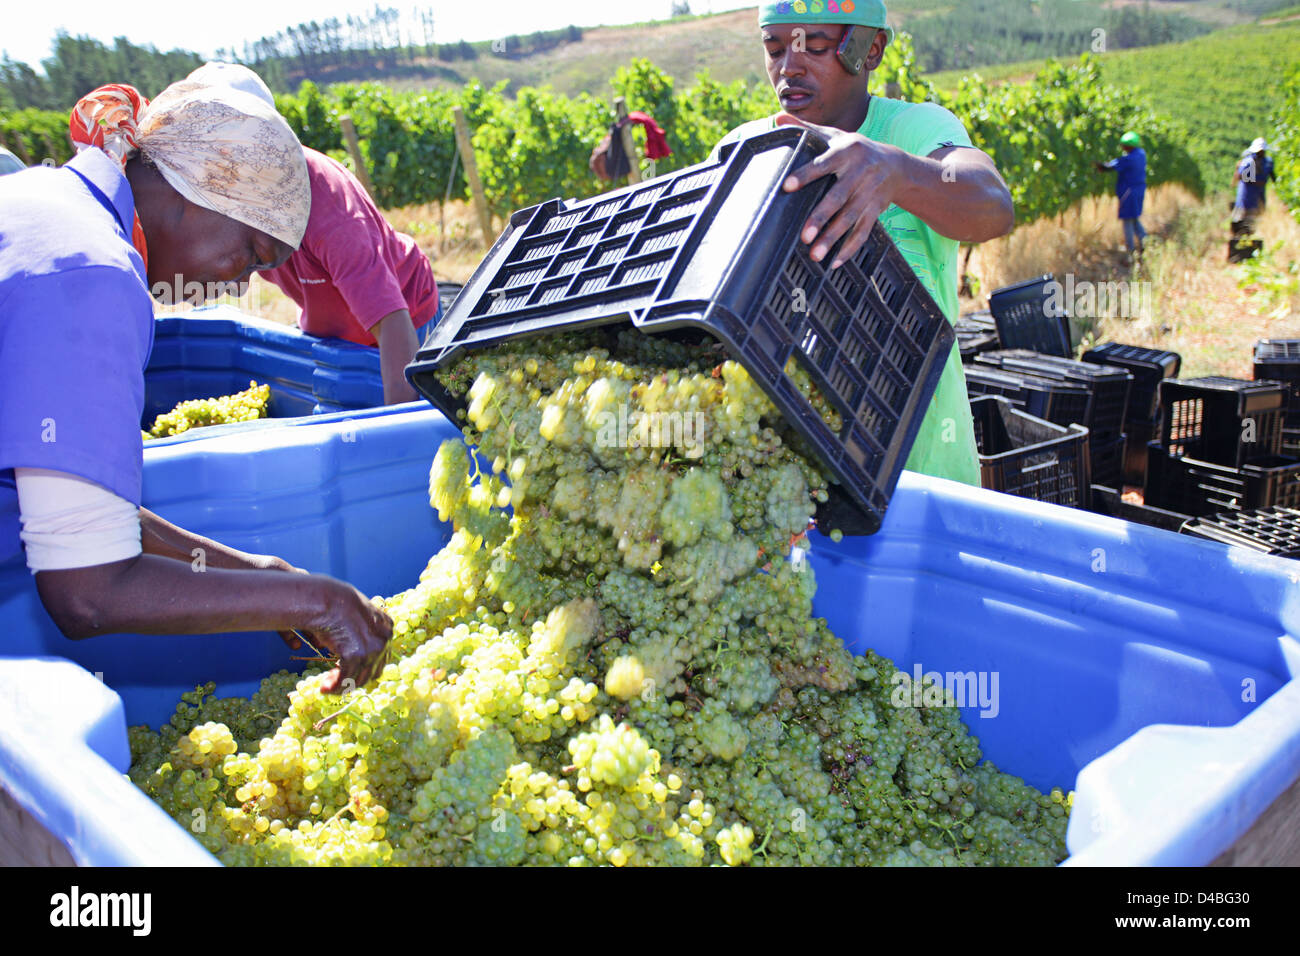 Pouring freshly picked white grapes into a bin to be taken for pressing Stock Photo